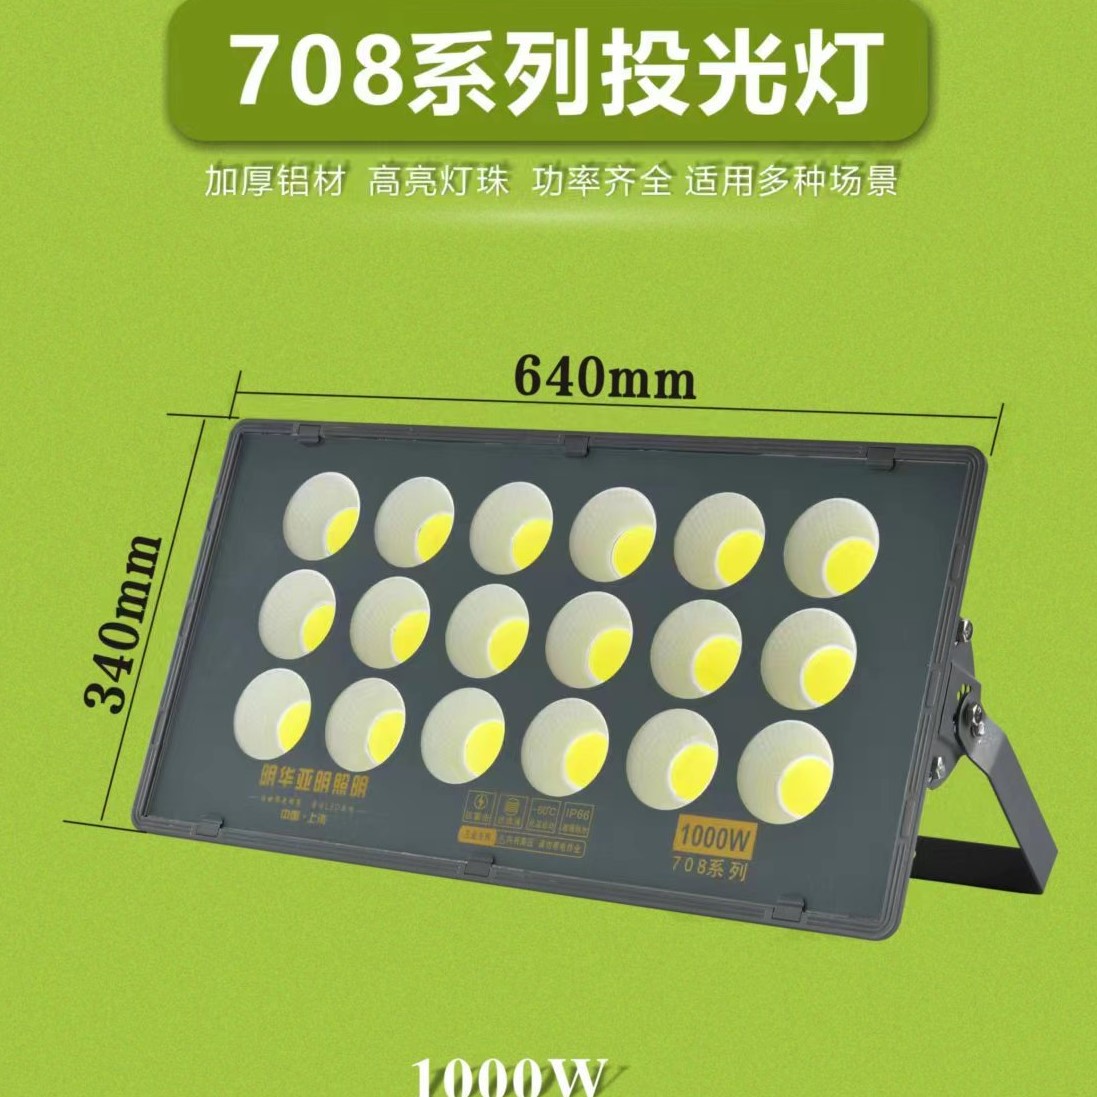 708 series ultra-bright outdoor engineering projection light